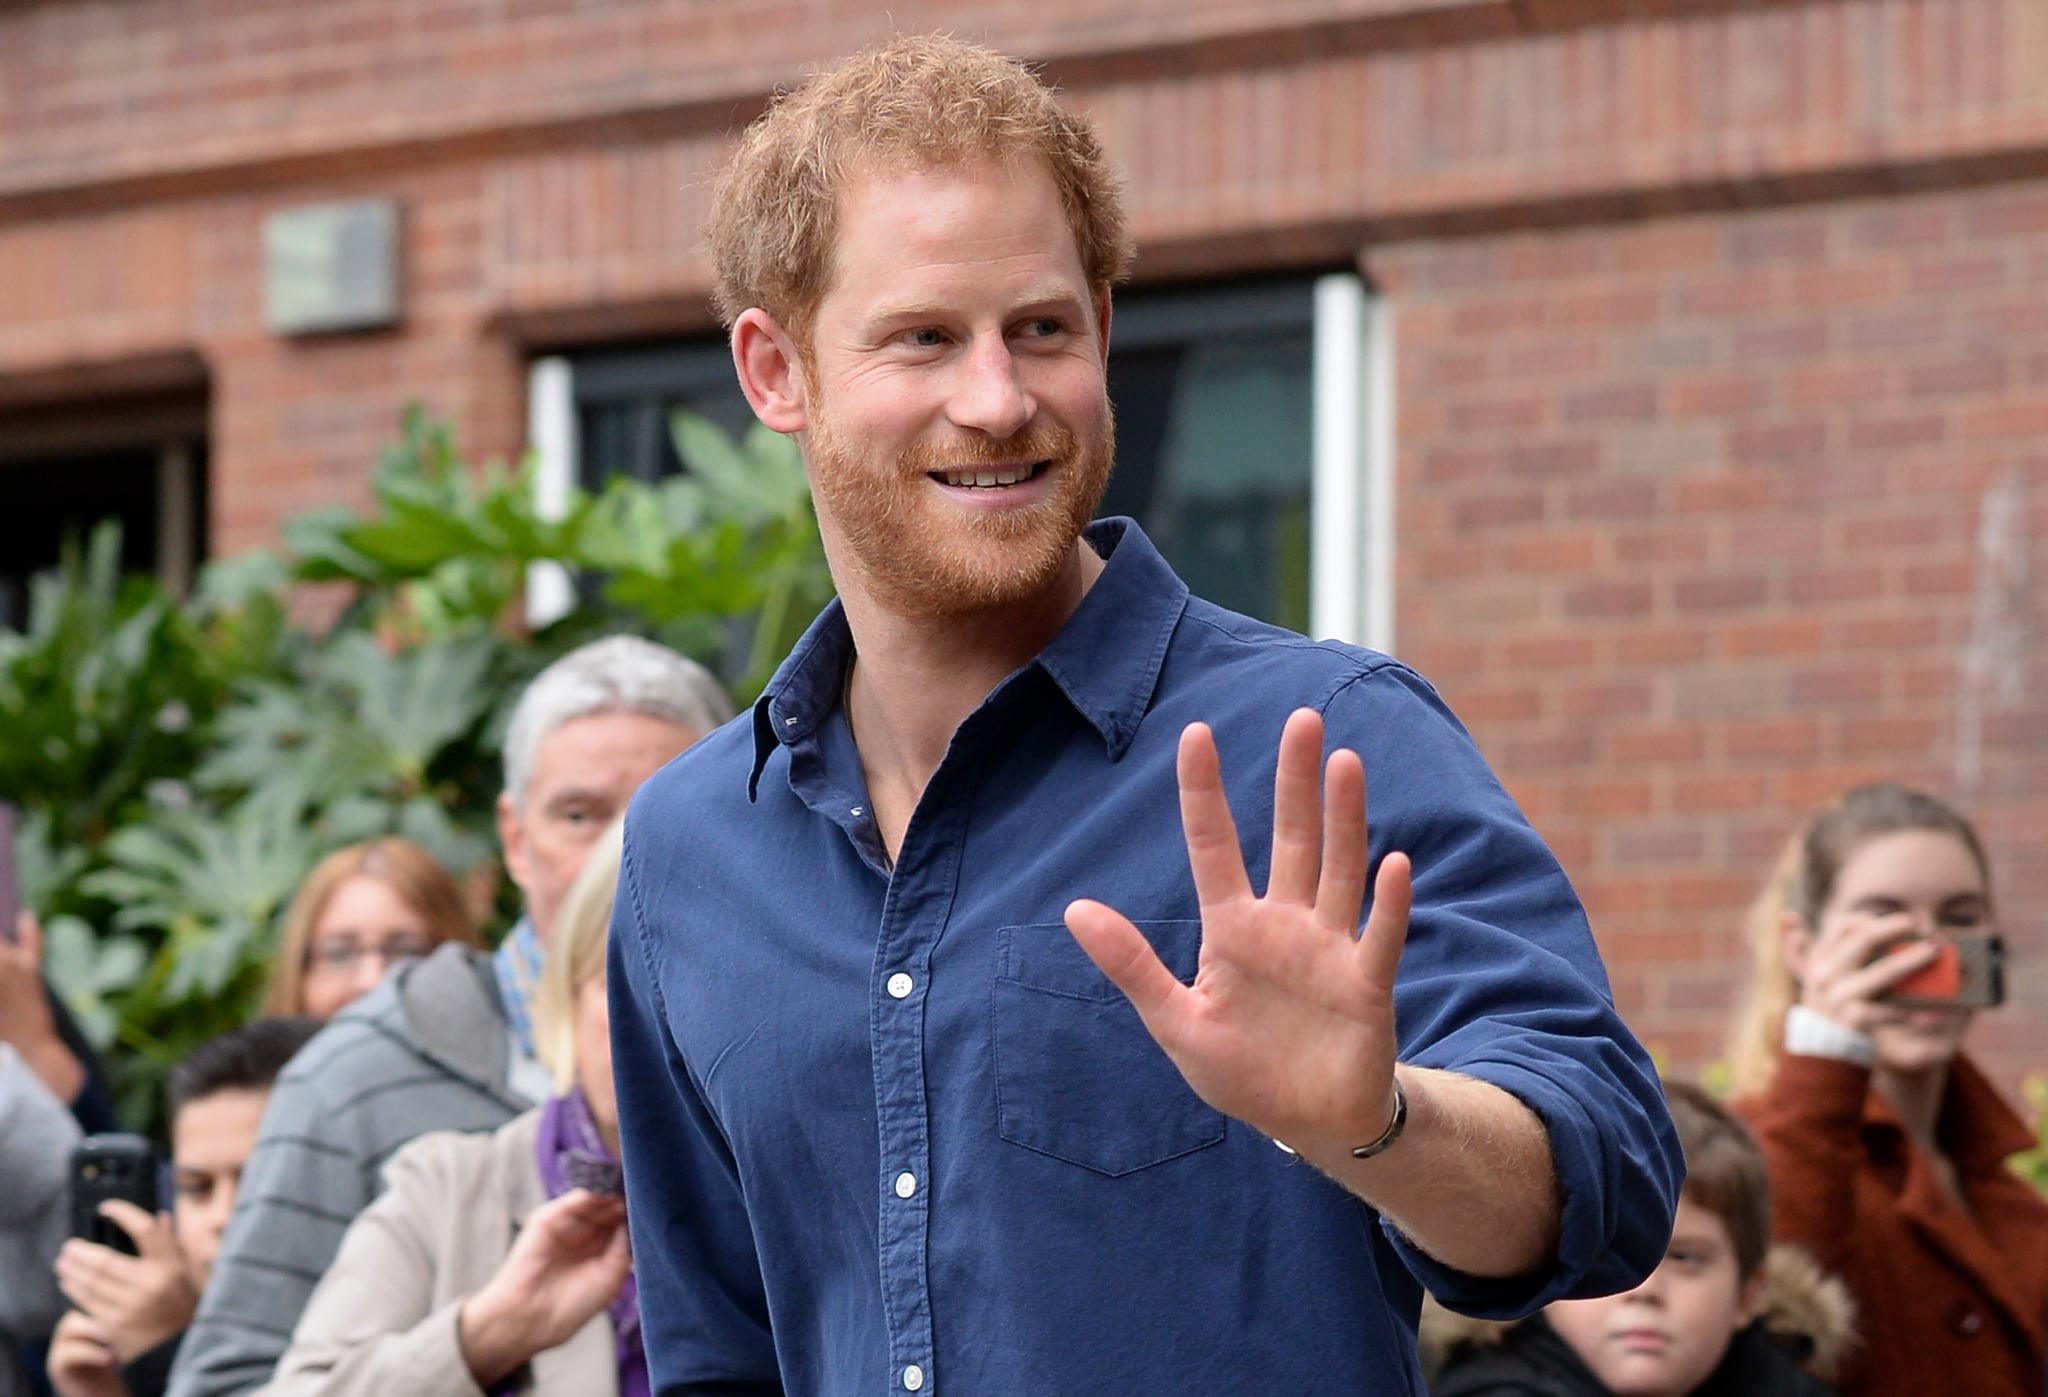 NOTTINGHAM, ENGLAND -  OCTOBER 26: Prince Harry waves as he leaves Nottingham's new Central Police Station on October 26, 2016 in Nottingham, England. (Photo by Joe Giddins - WPA Pool/Getty Images)